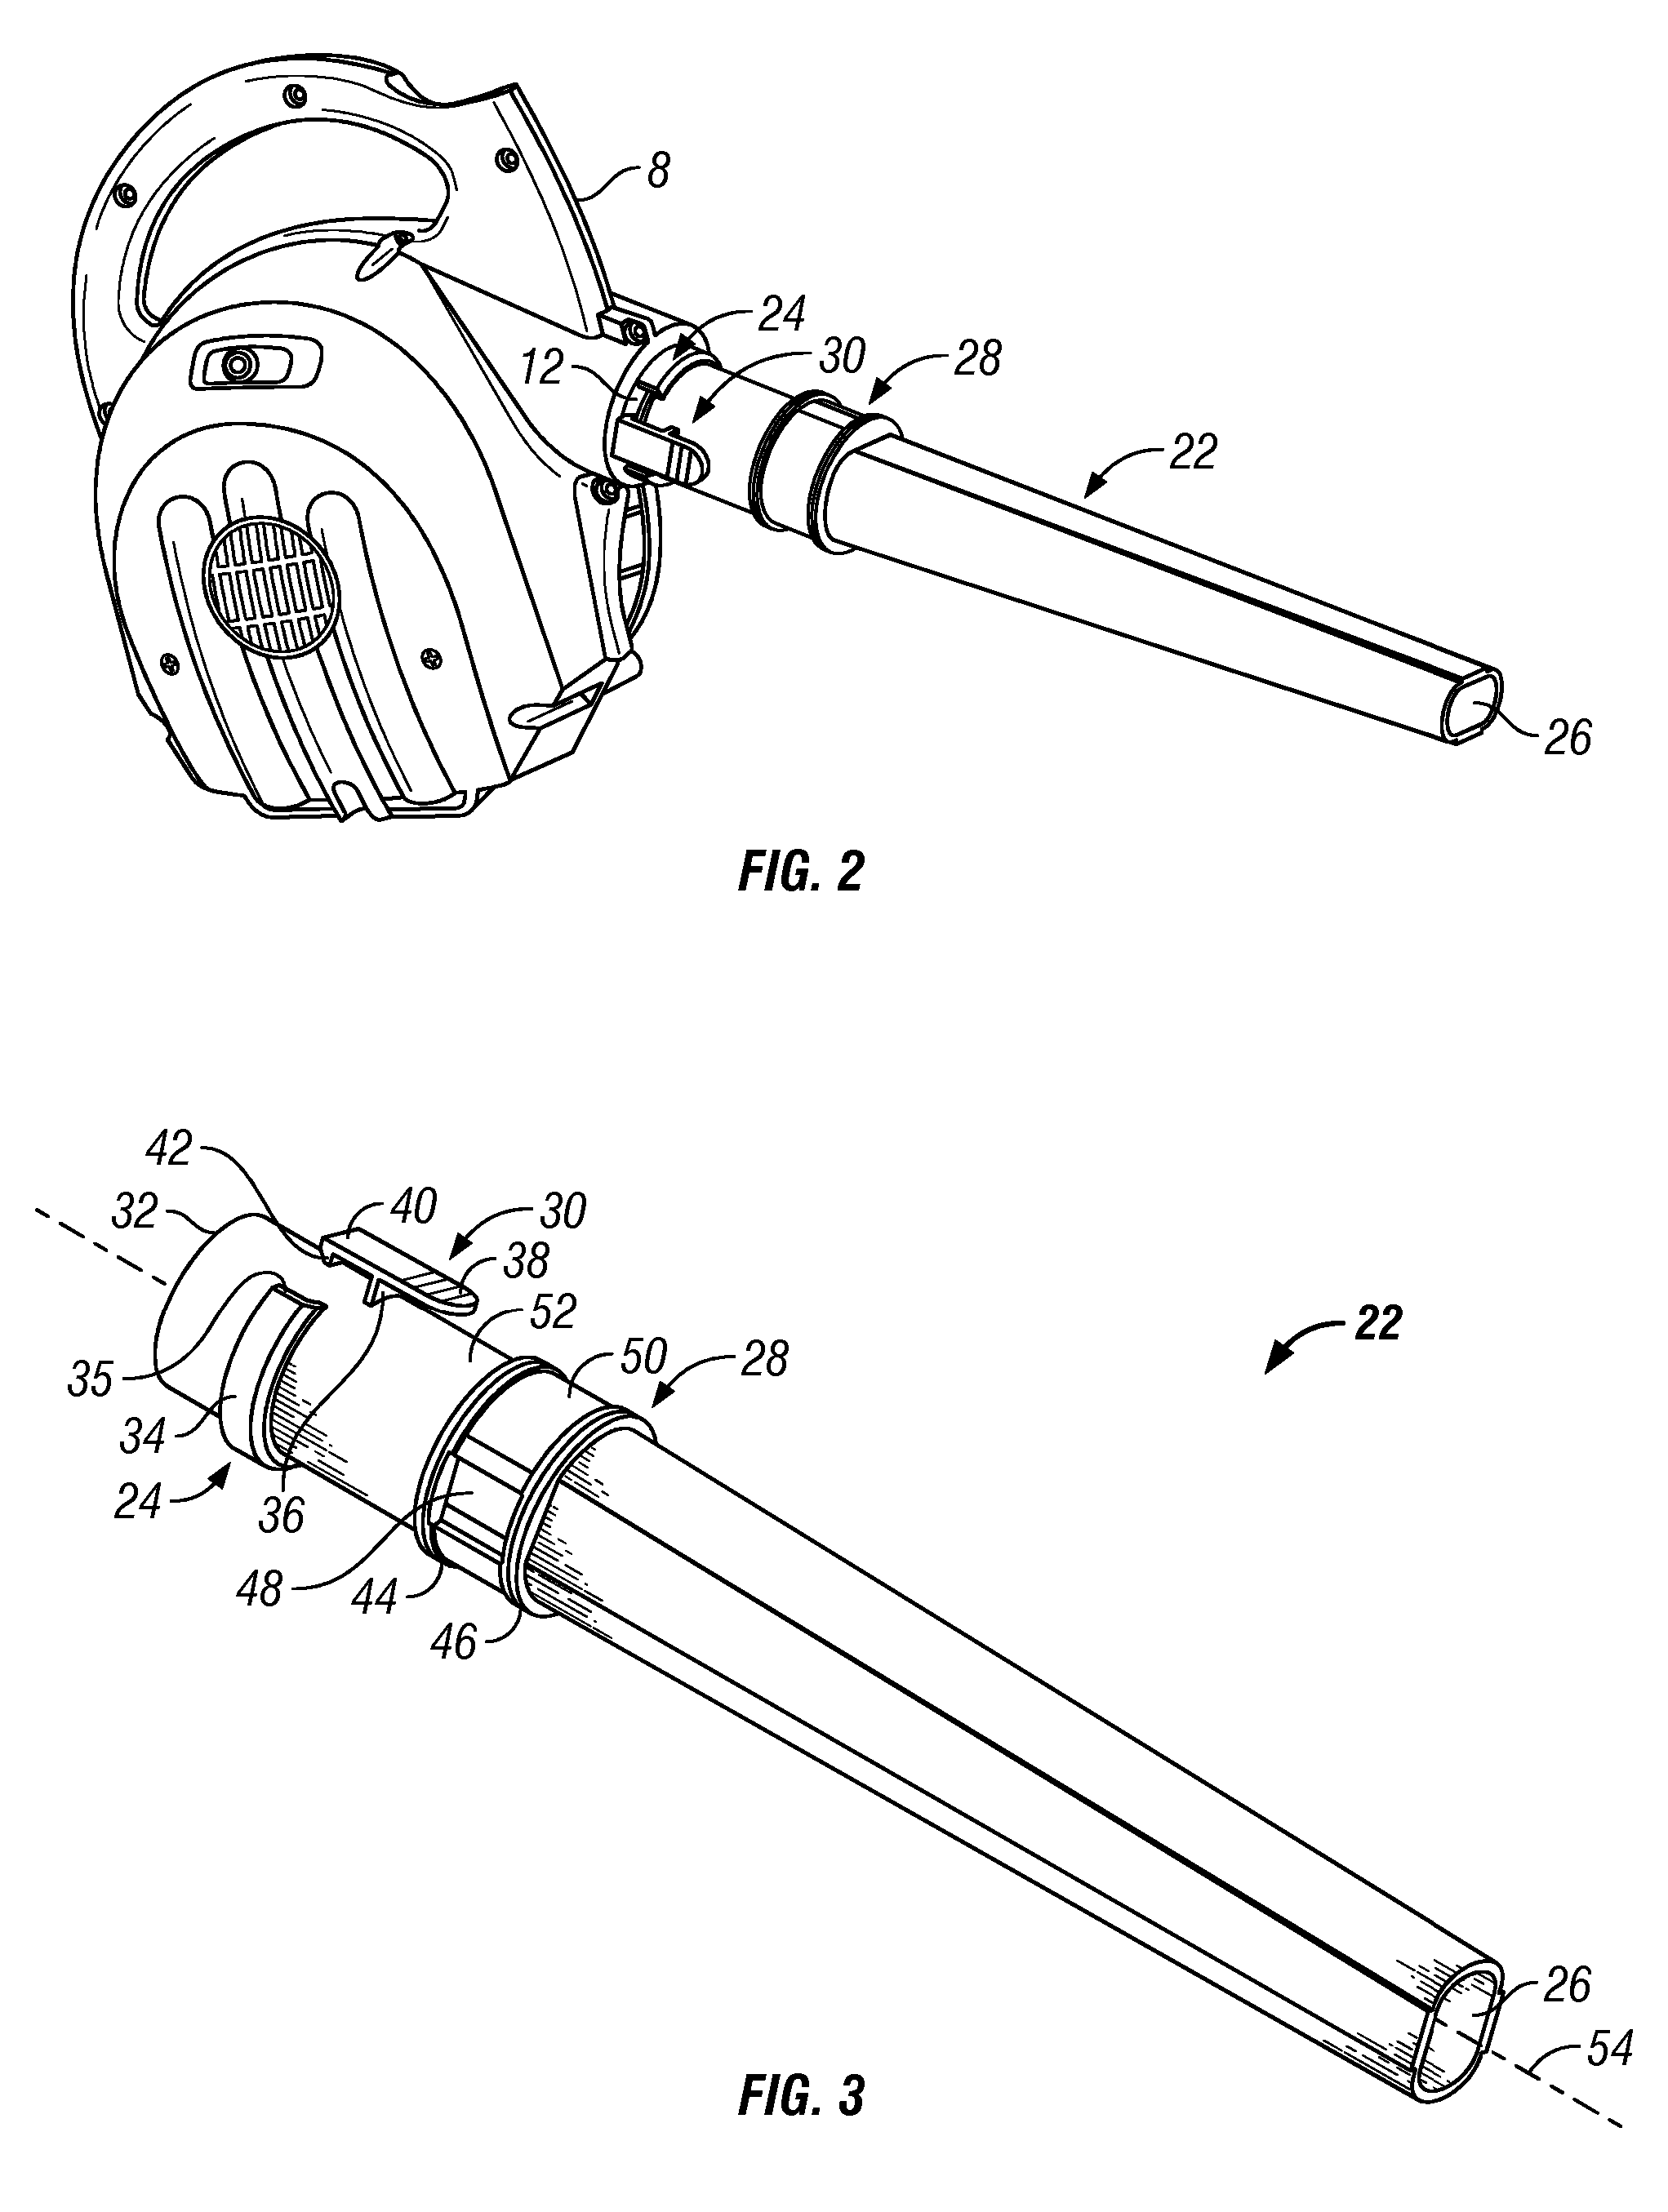 Locking blower nozzle with air bleed